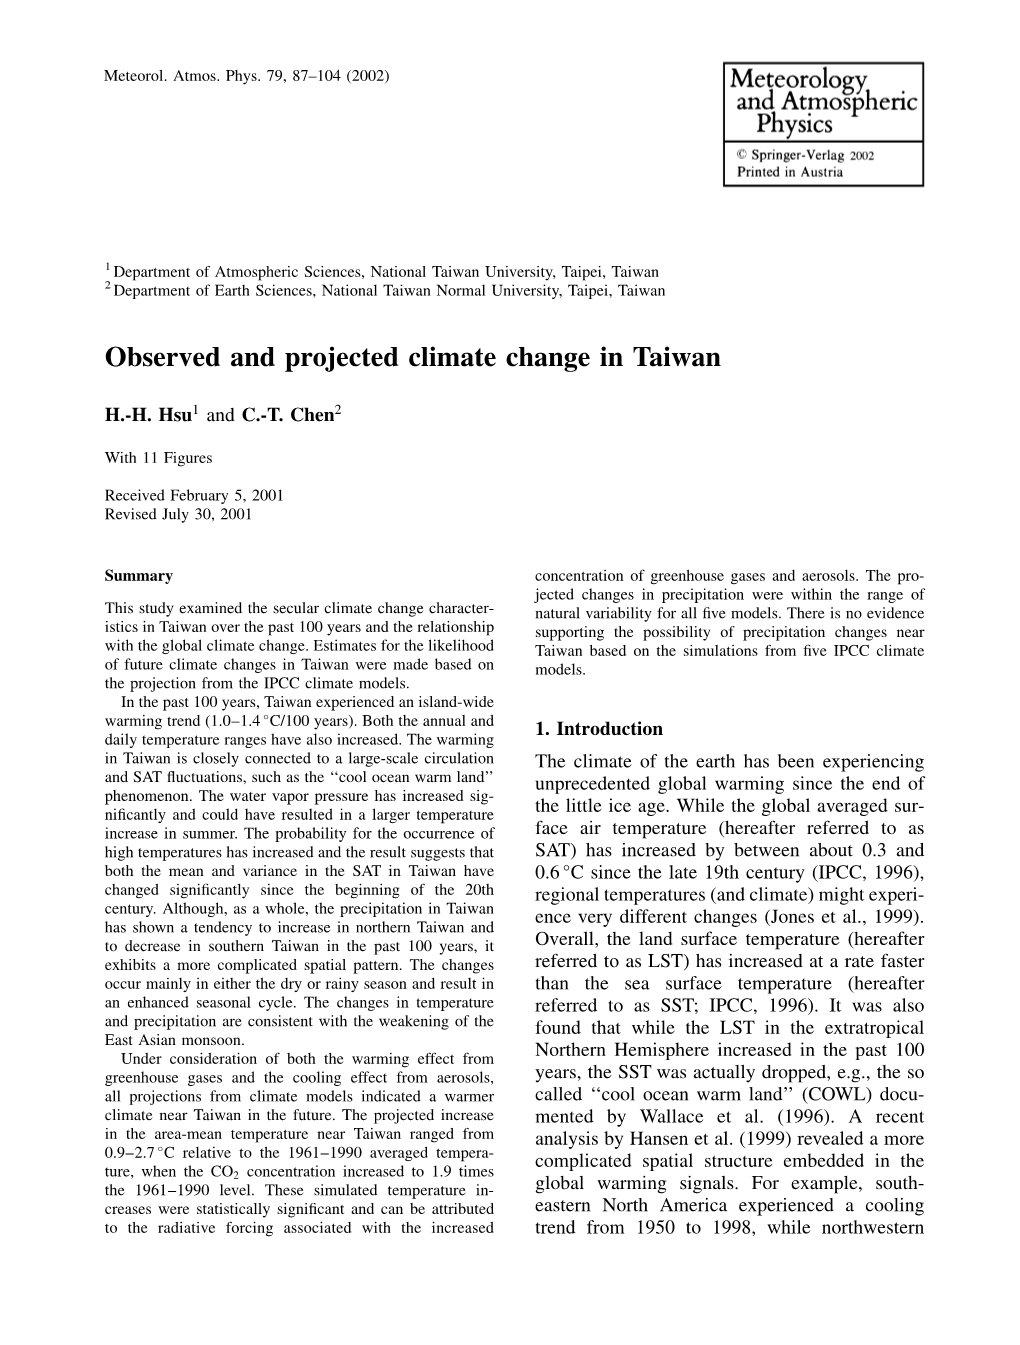 Observed and Projected Climate Change in Taiwan